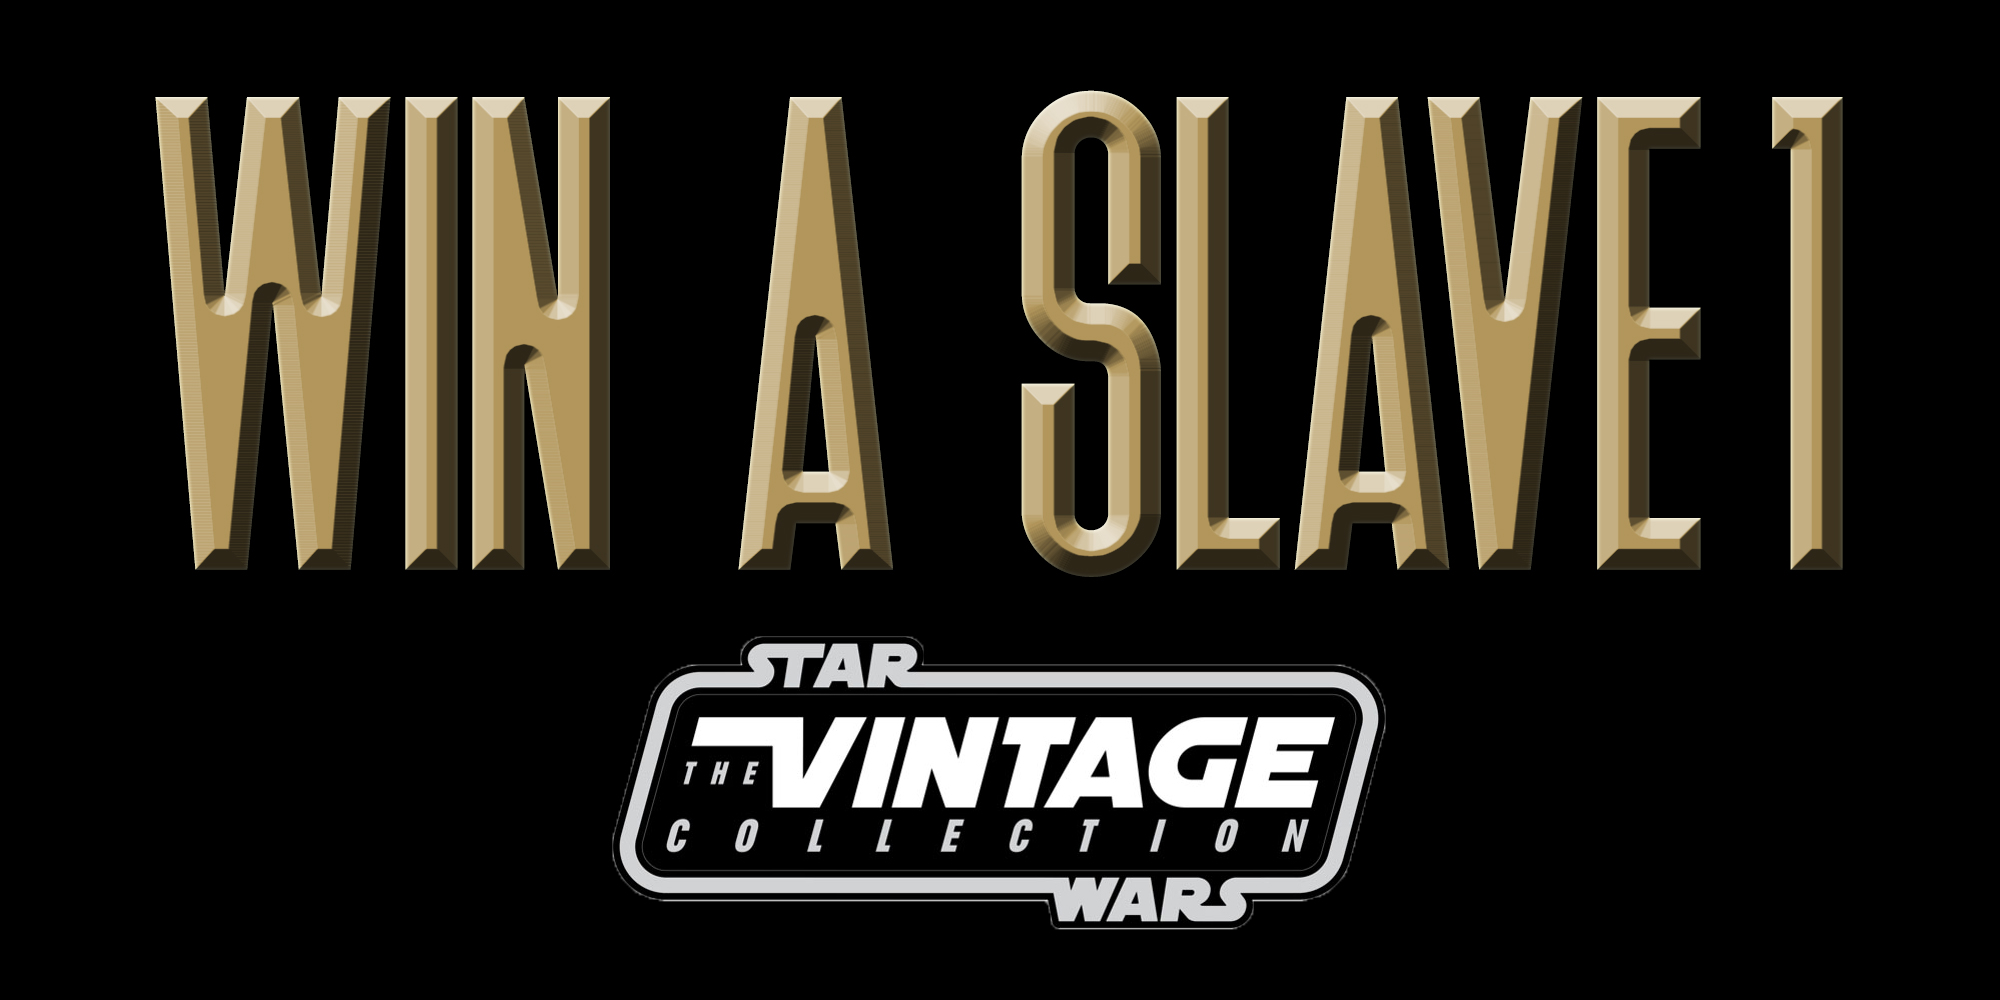 Win 1 The Vintage Collection Slave 1 Vehicle